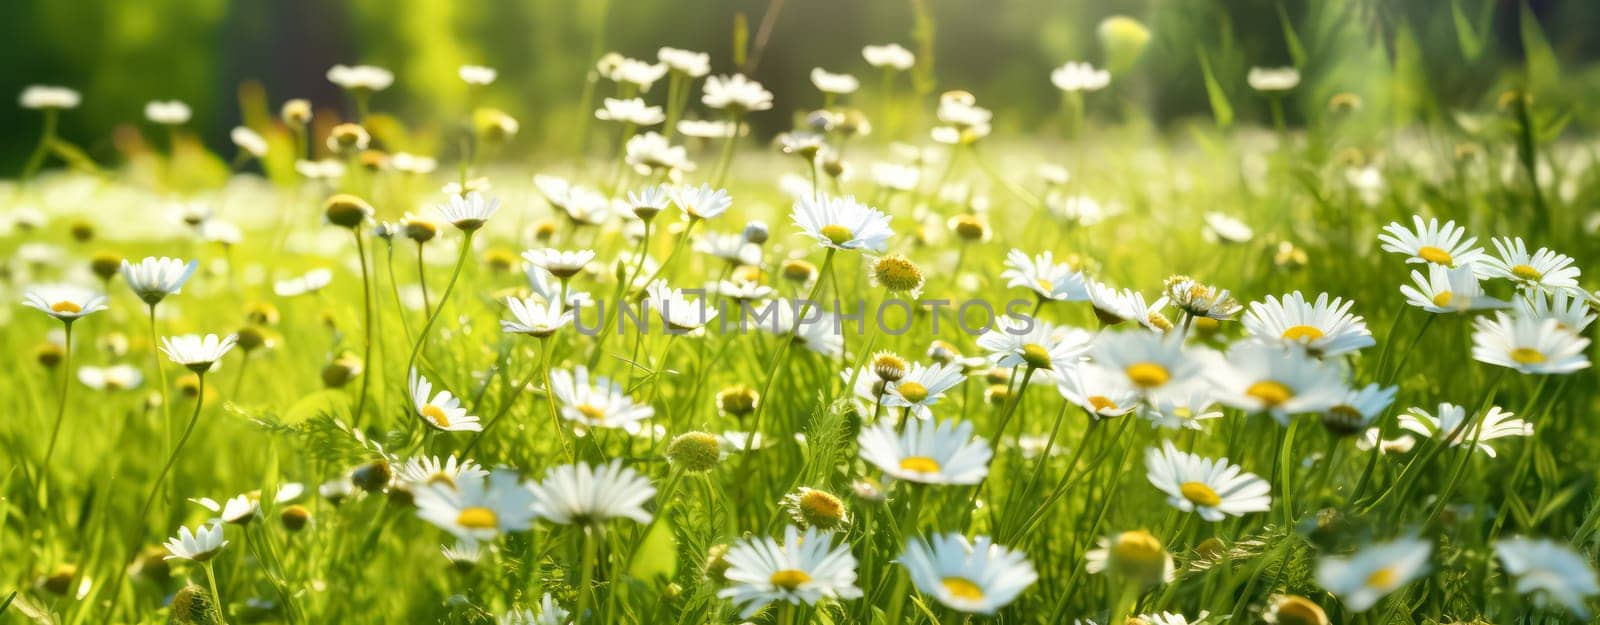 Elegant wild daisies grace the meadow, their white petals contrasting with the lush green grass. A picturesque scene embodying the essence of nature and gardening.